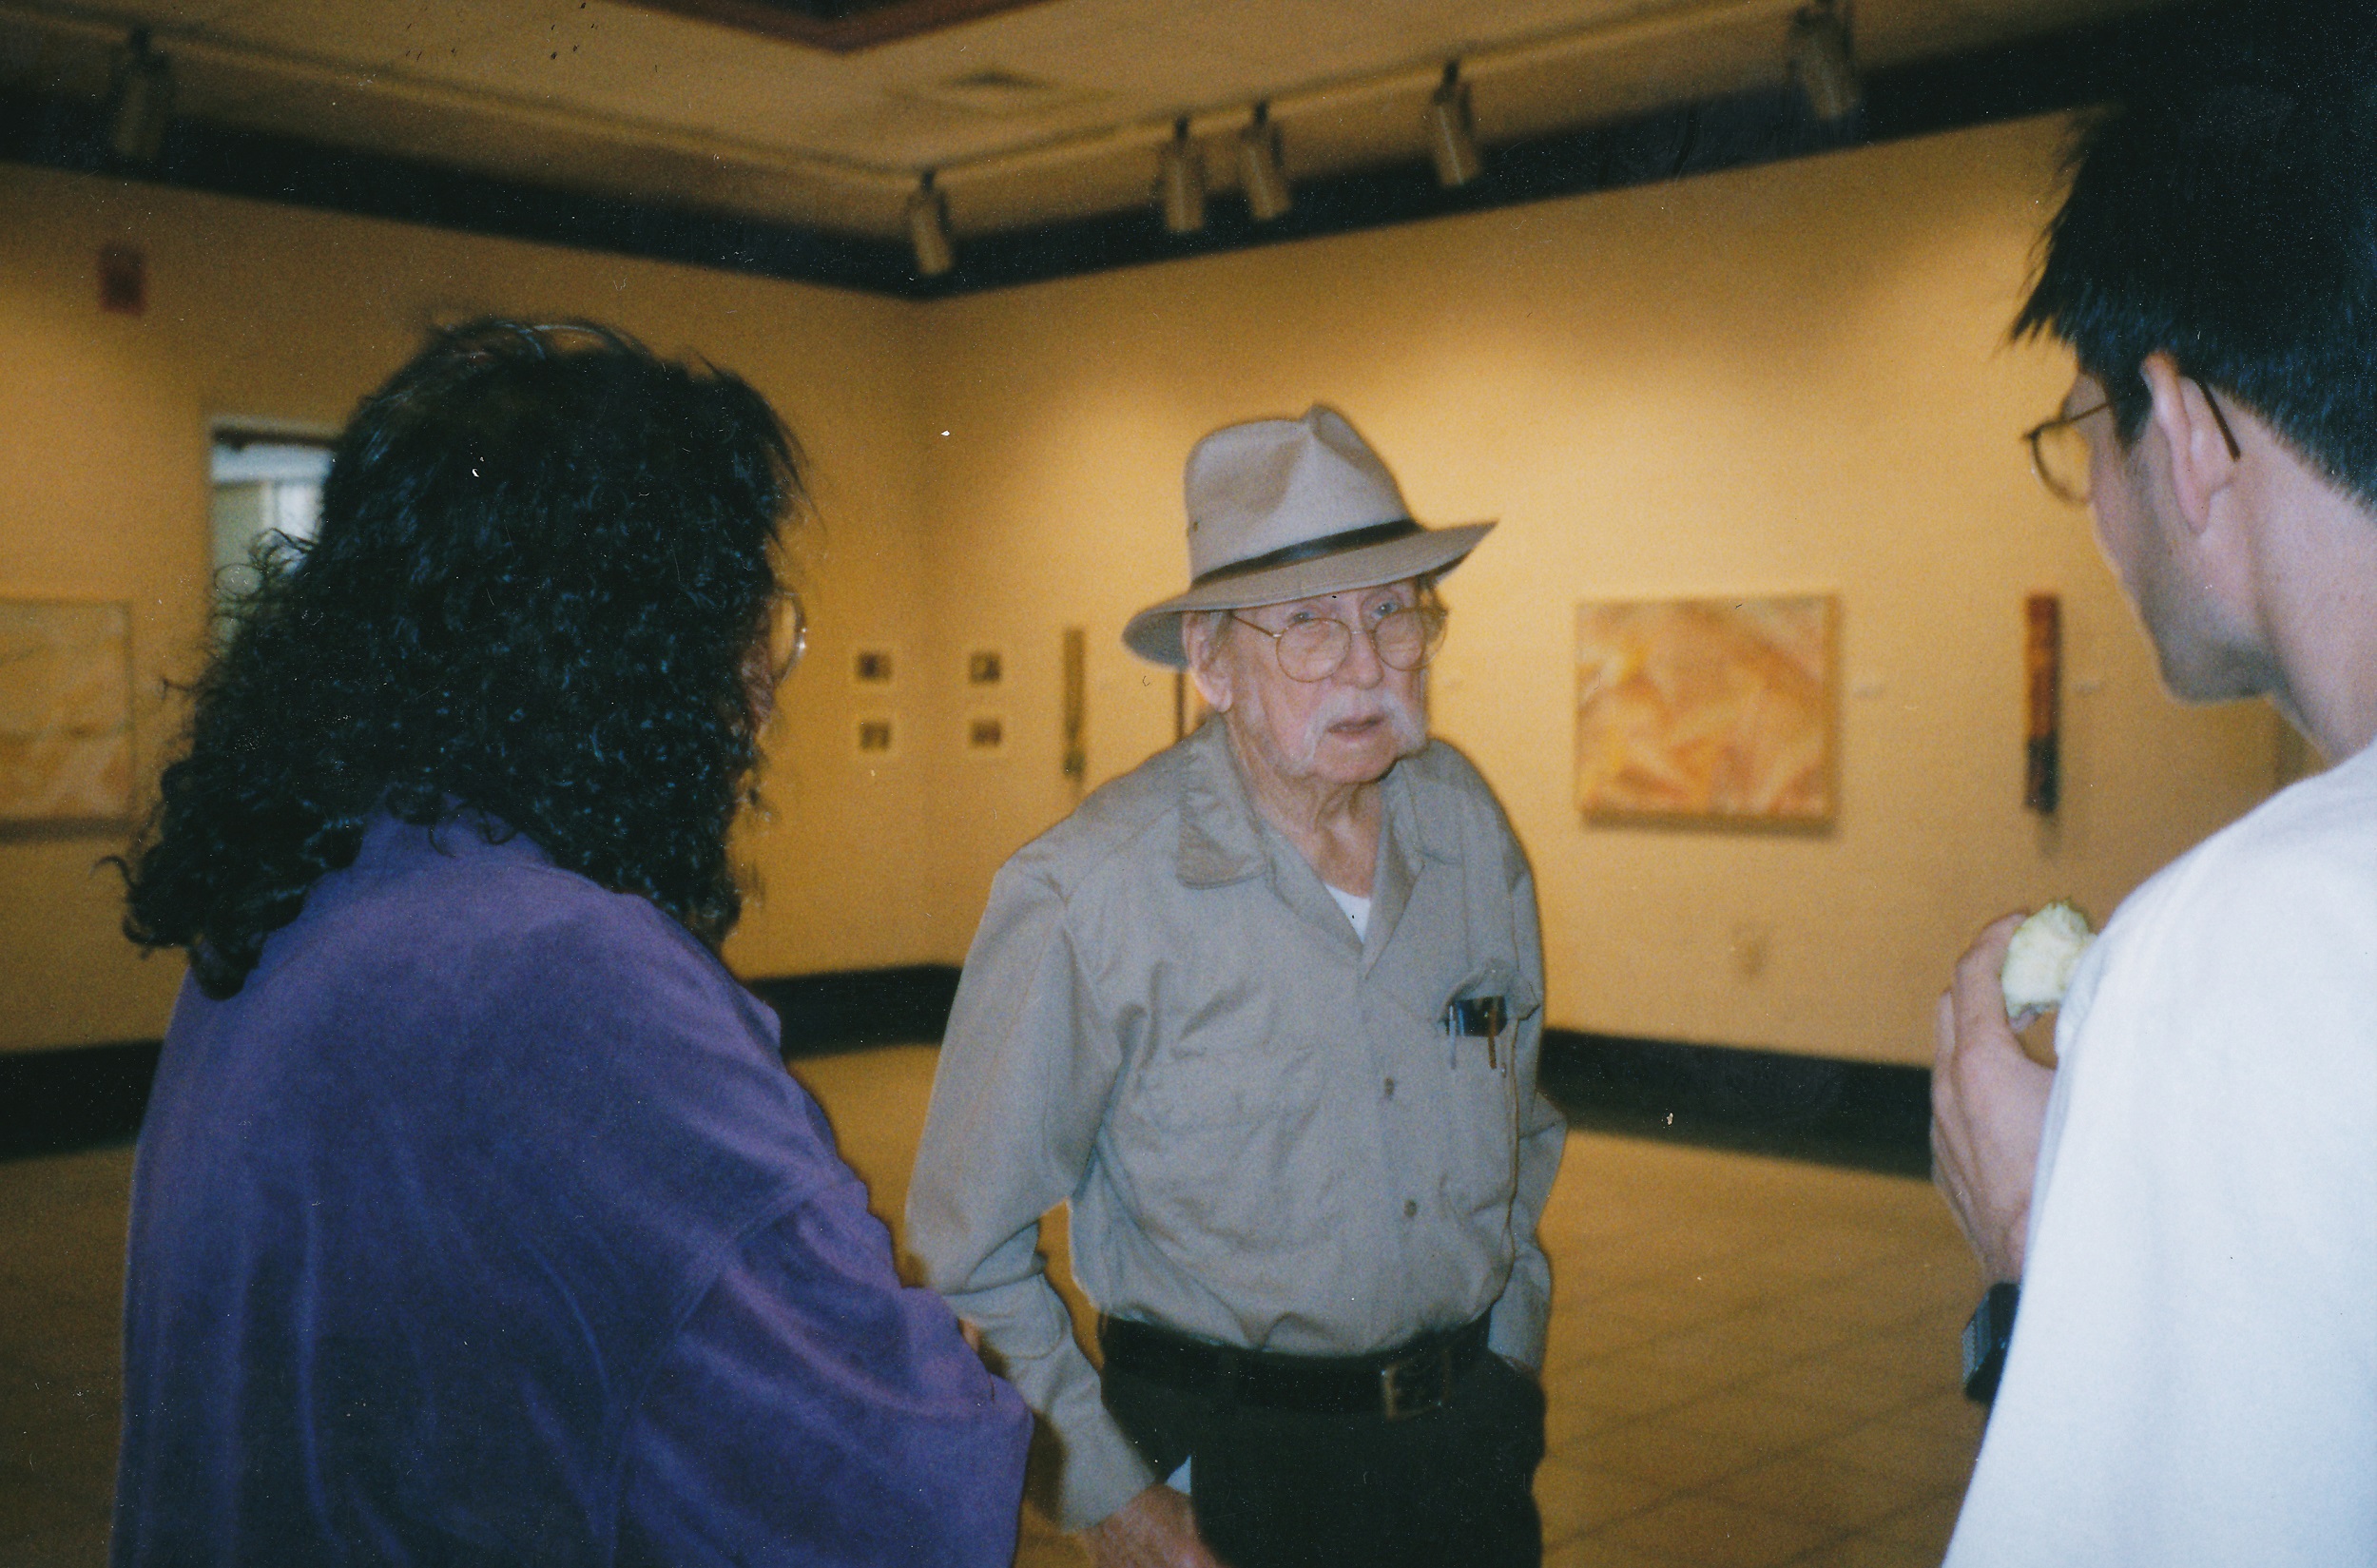 Color photograph of a woman with curly dark hair, wearing a purple velvet top, speaking with an older man with a white moustache, wearing a hat, and a younger man with dark hair and glasses.